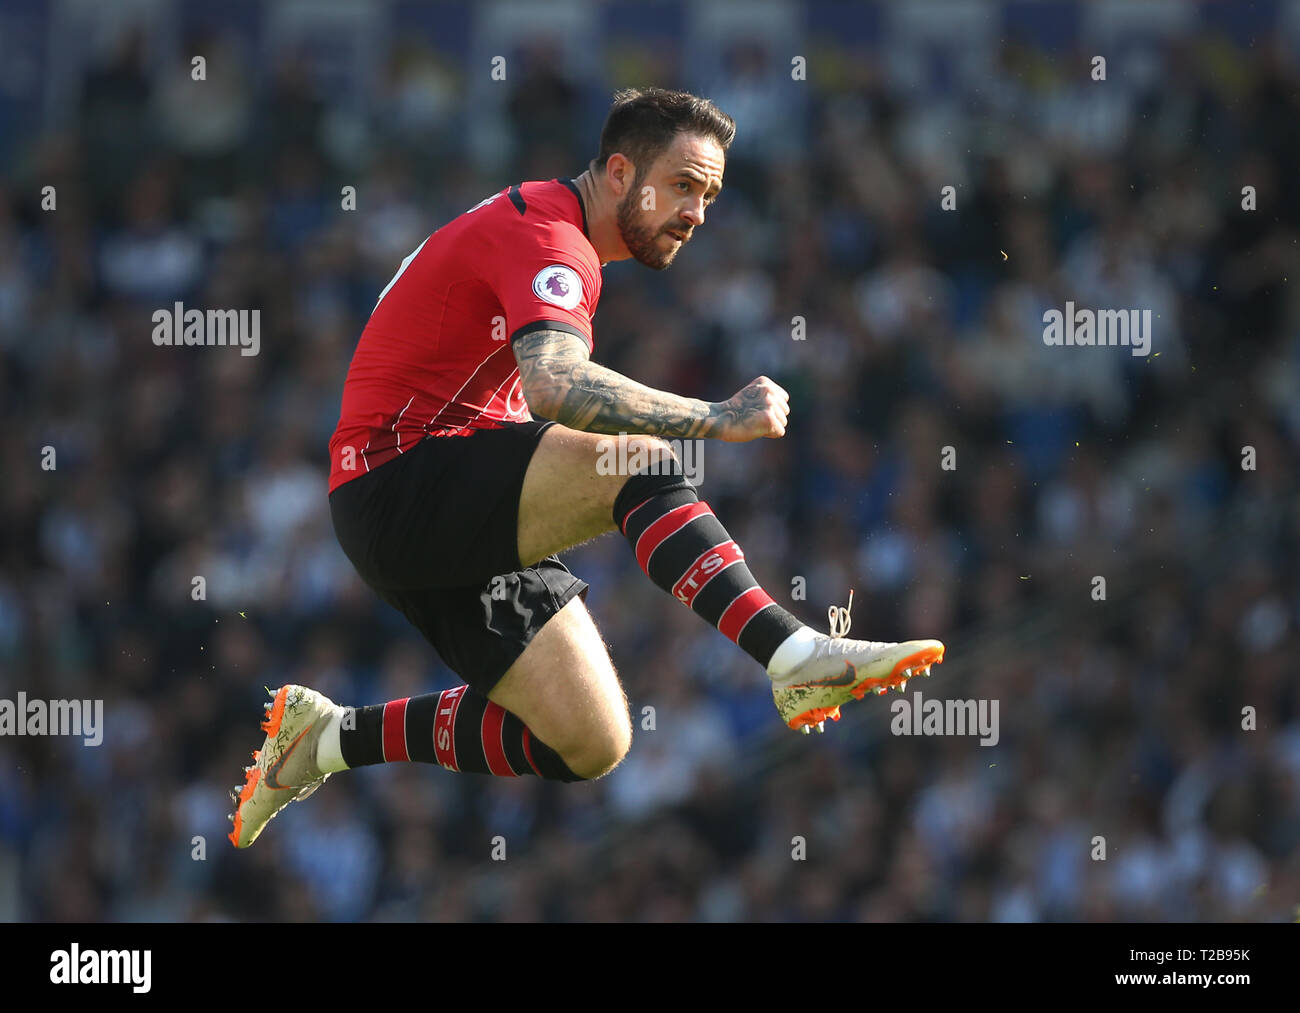 Southampton's Danny Ings during the English Premier League match between Brighton Hove Albion and Southampton at the Amex Stadium in Brighton. 30 March  2019 Photo James Boardman / Telephoto Images EDITORIAL USE ONLY. No use with unauthorized audio, video, data, fixture lists, club/league logos or 'live' services. Online in-match use limited to 120 images, no video emulation. No use in betting, games or single club/league/player publications. Stock Photo